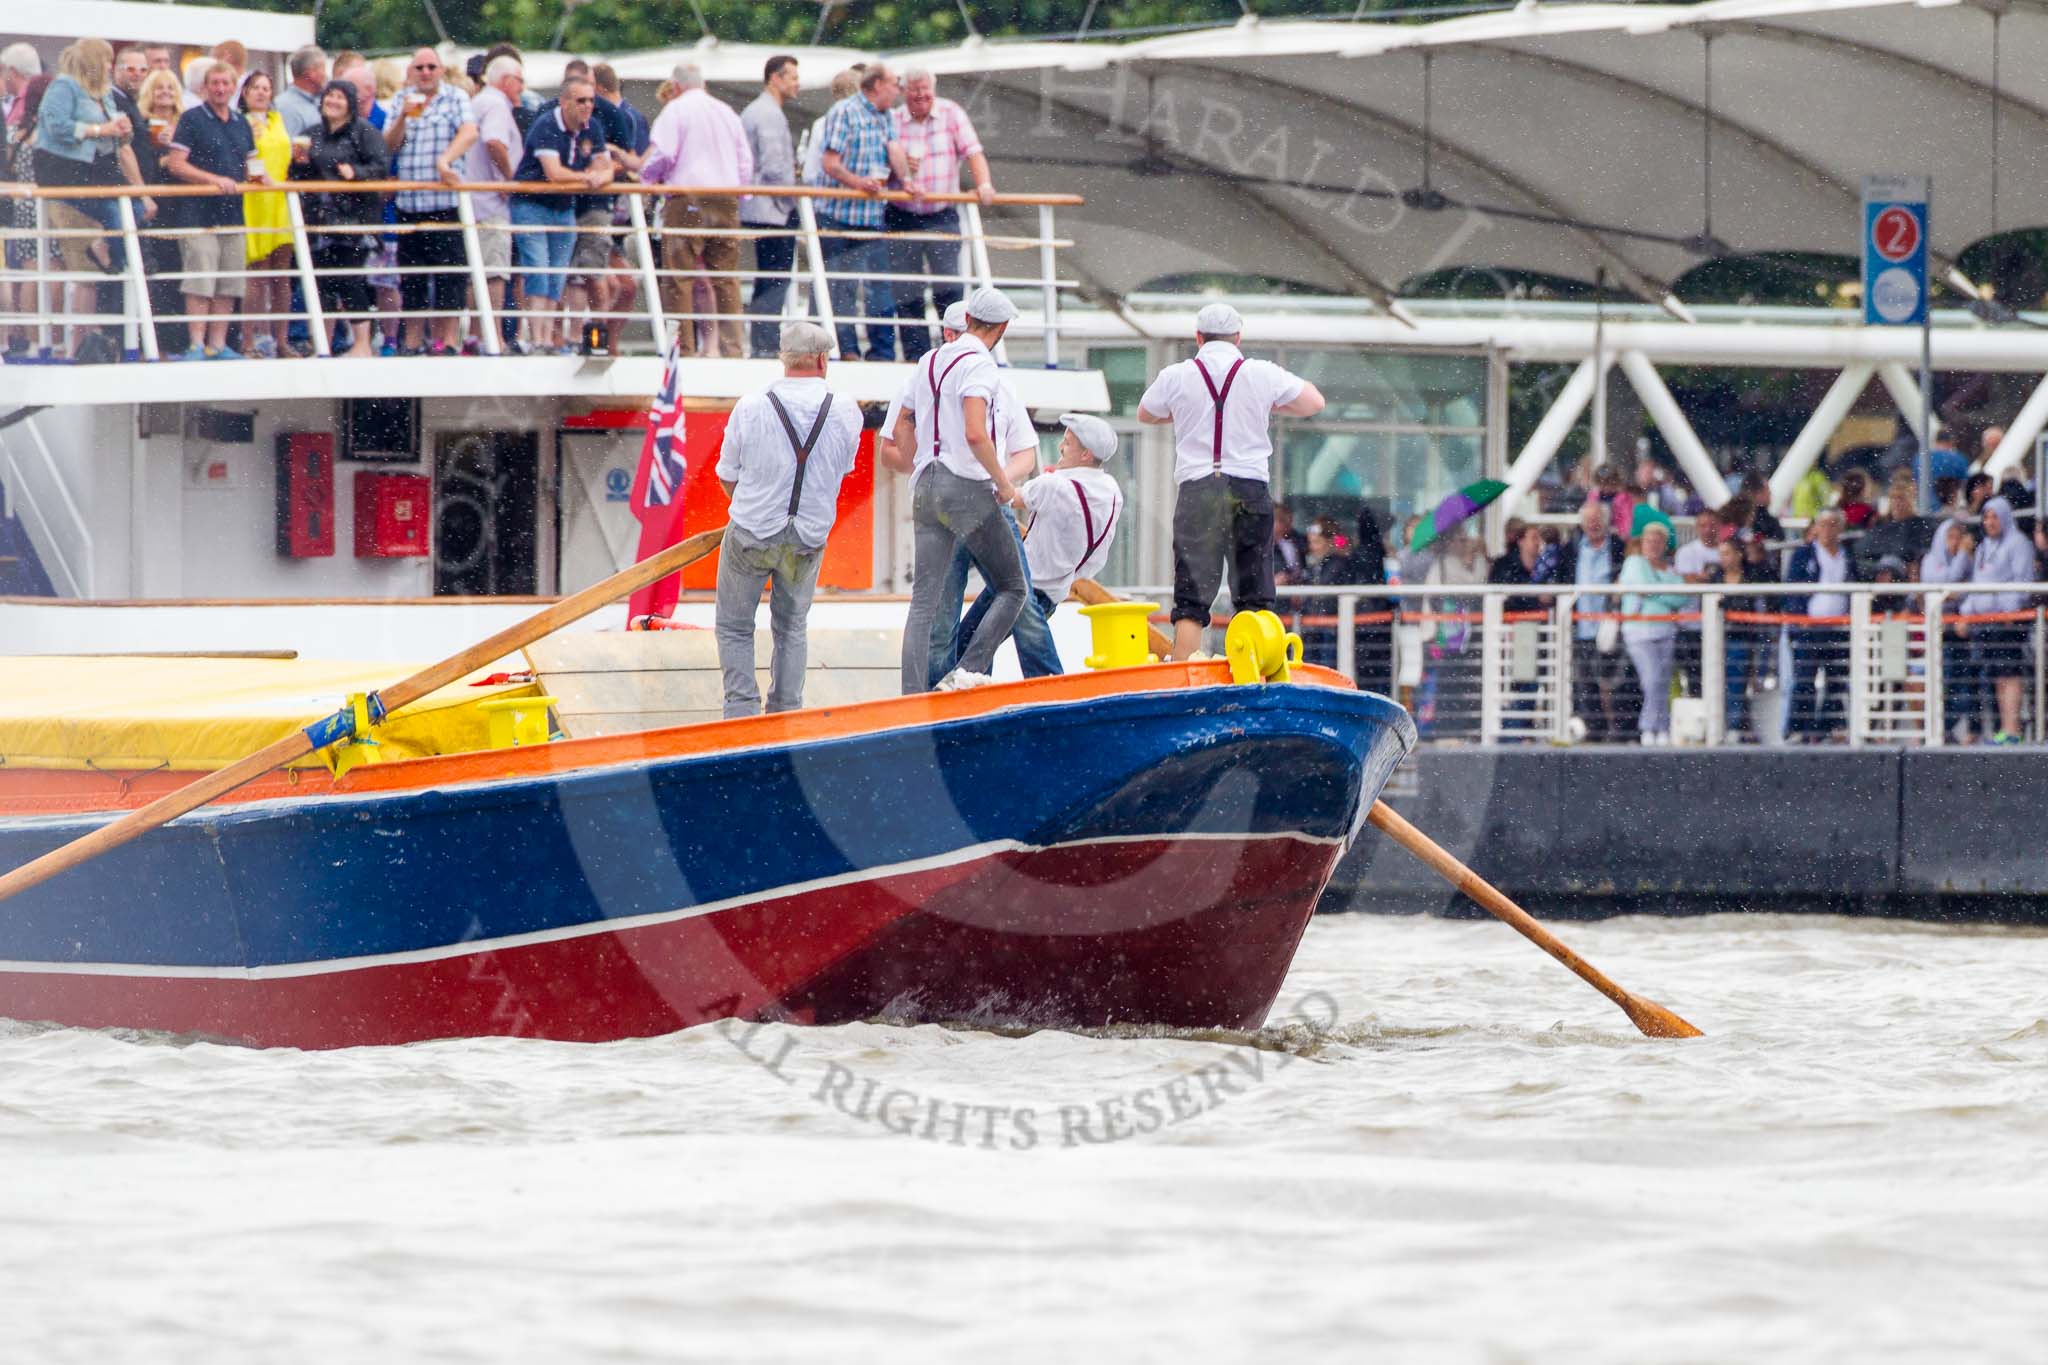 TOW River Thames Barge Driving Race 2014.
River Thames between Greenwich and Westminster,
London,

United Kingdom,
on 28 June 2014 at 14:23, image #407